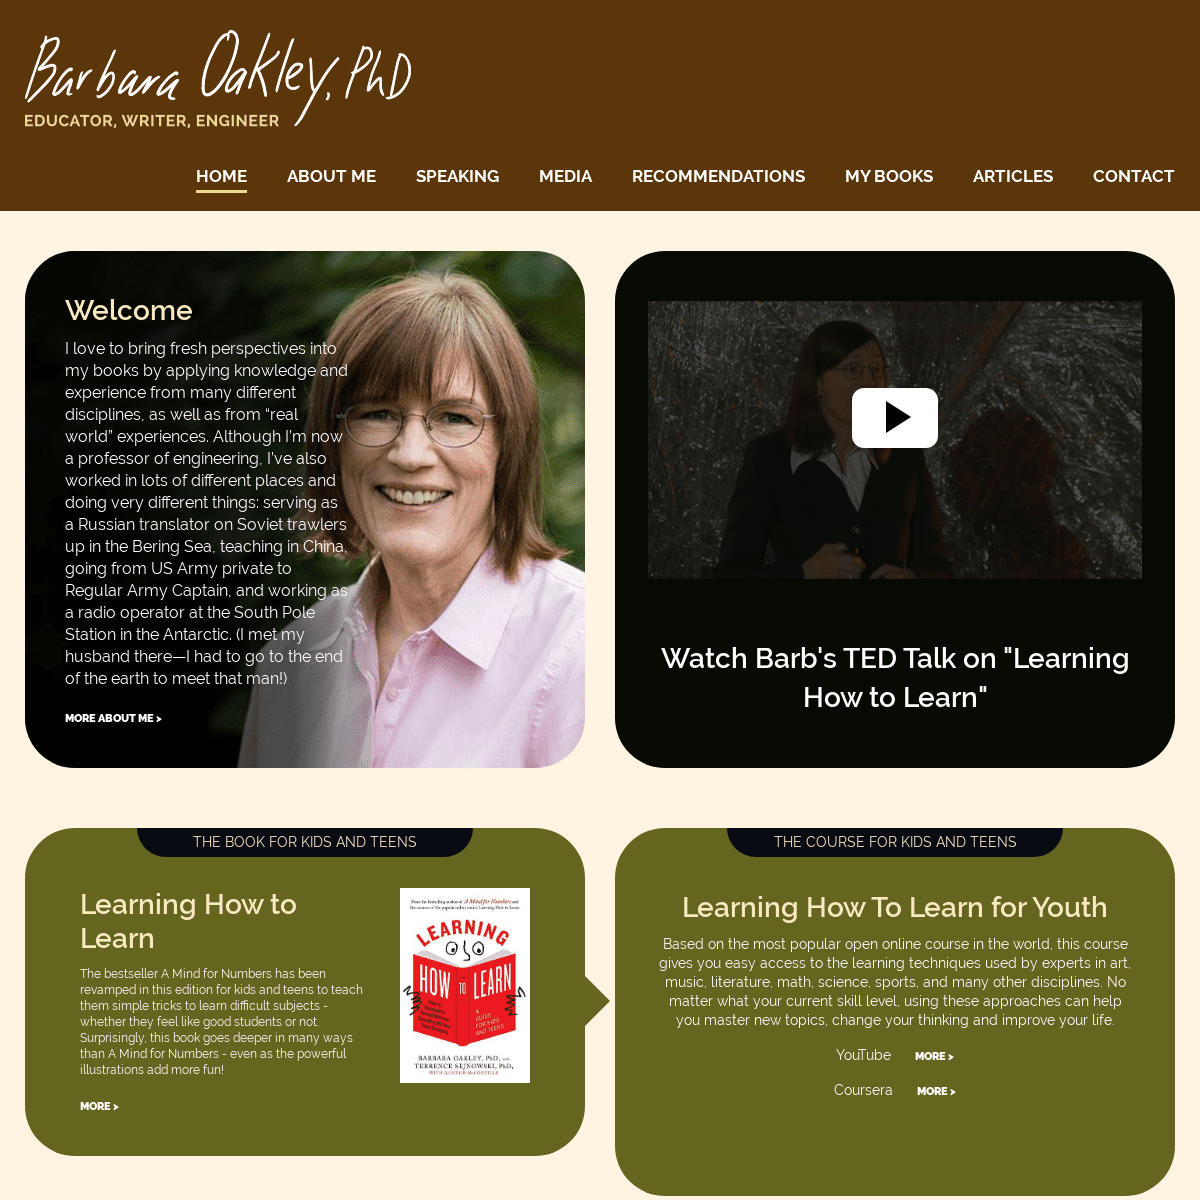 A complete backup of barbaraoakley.com